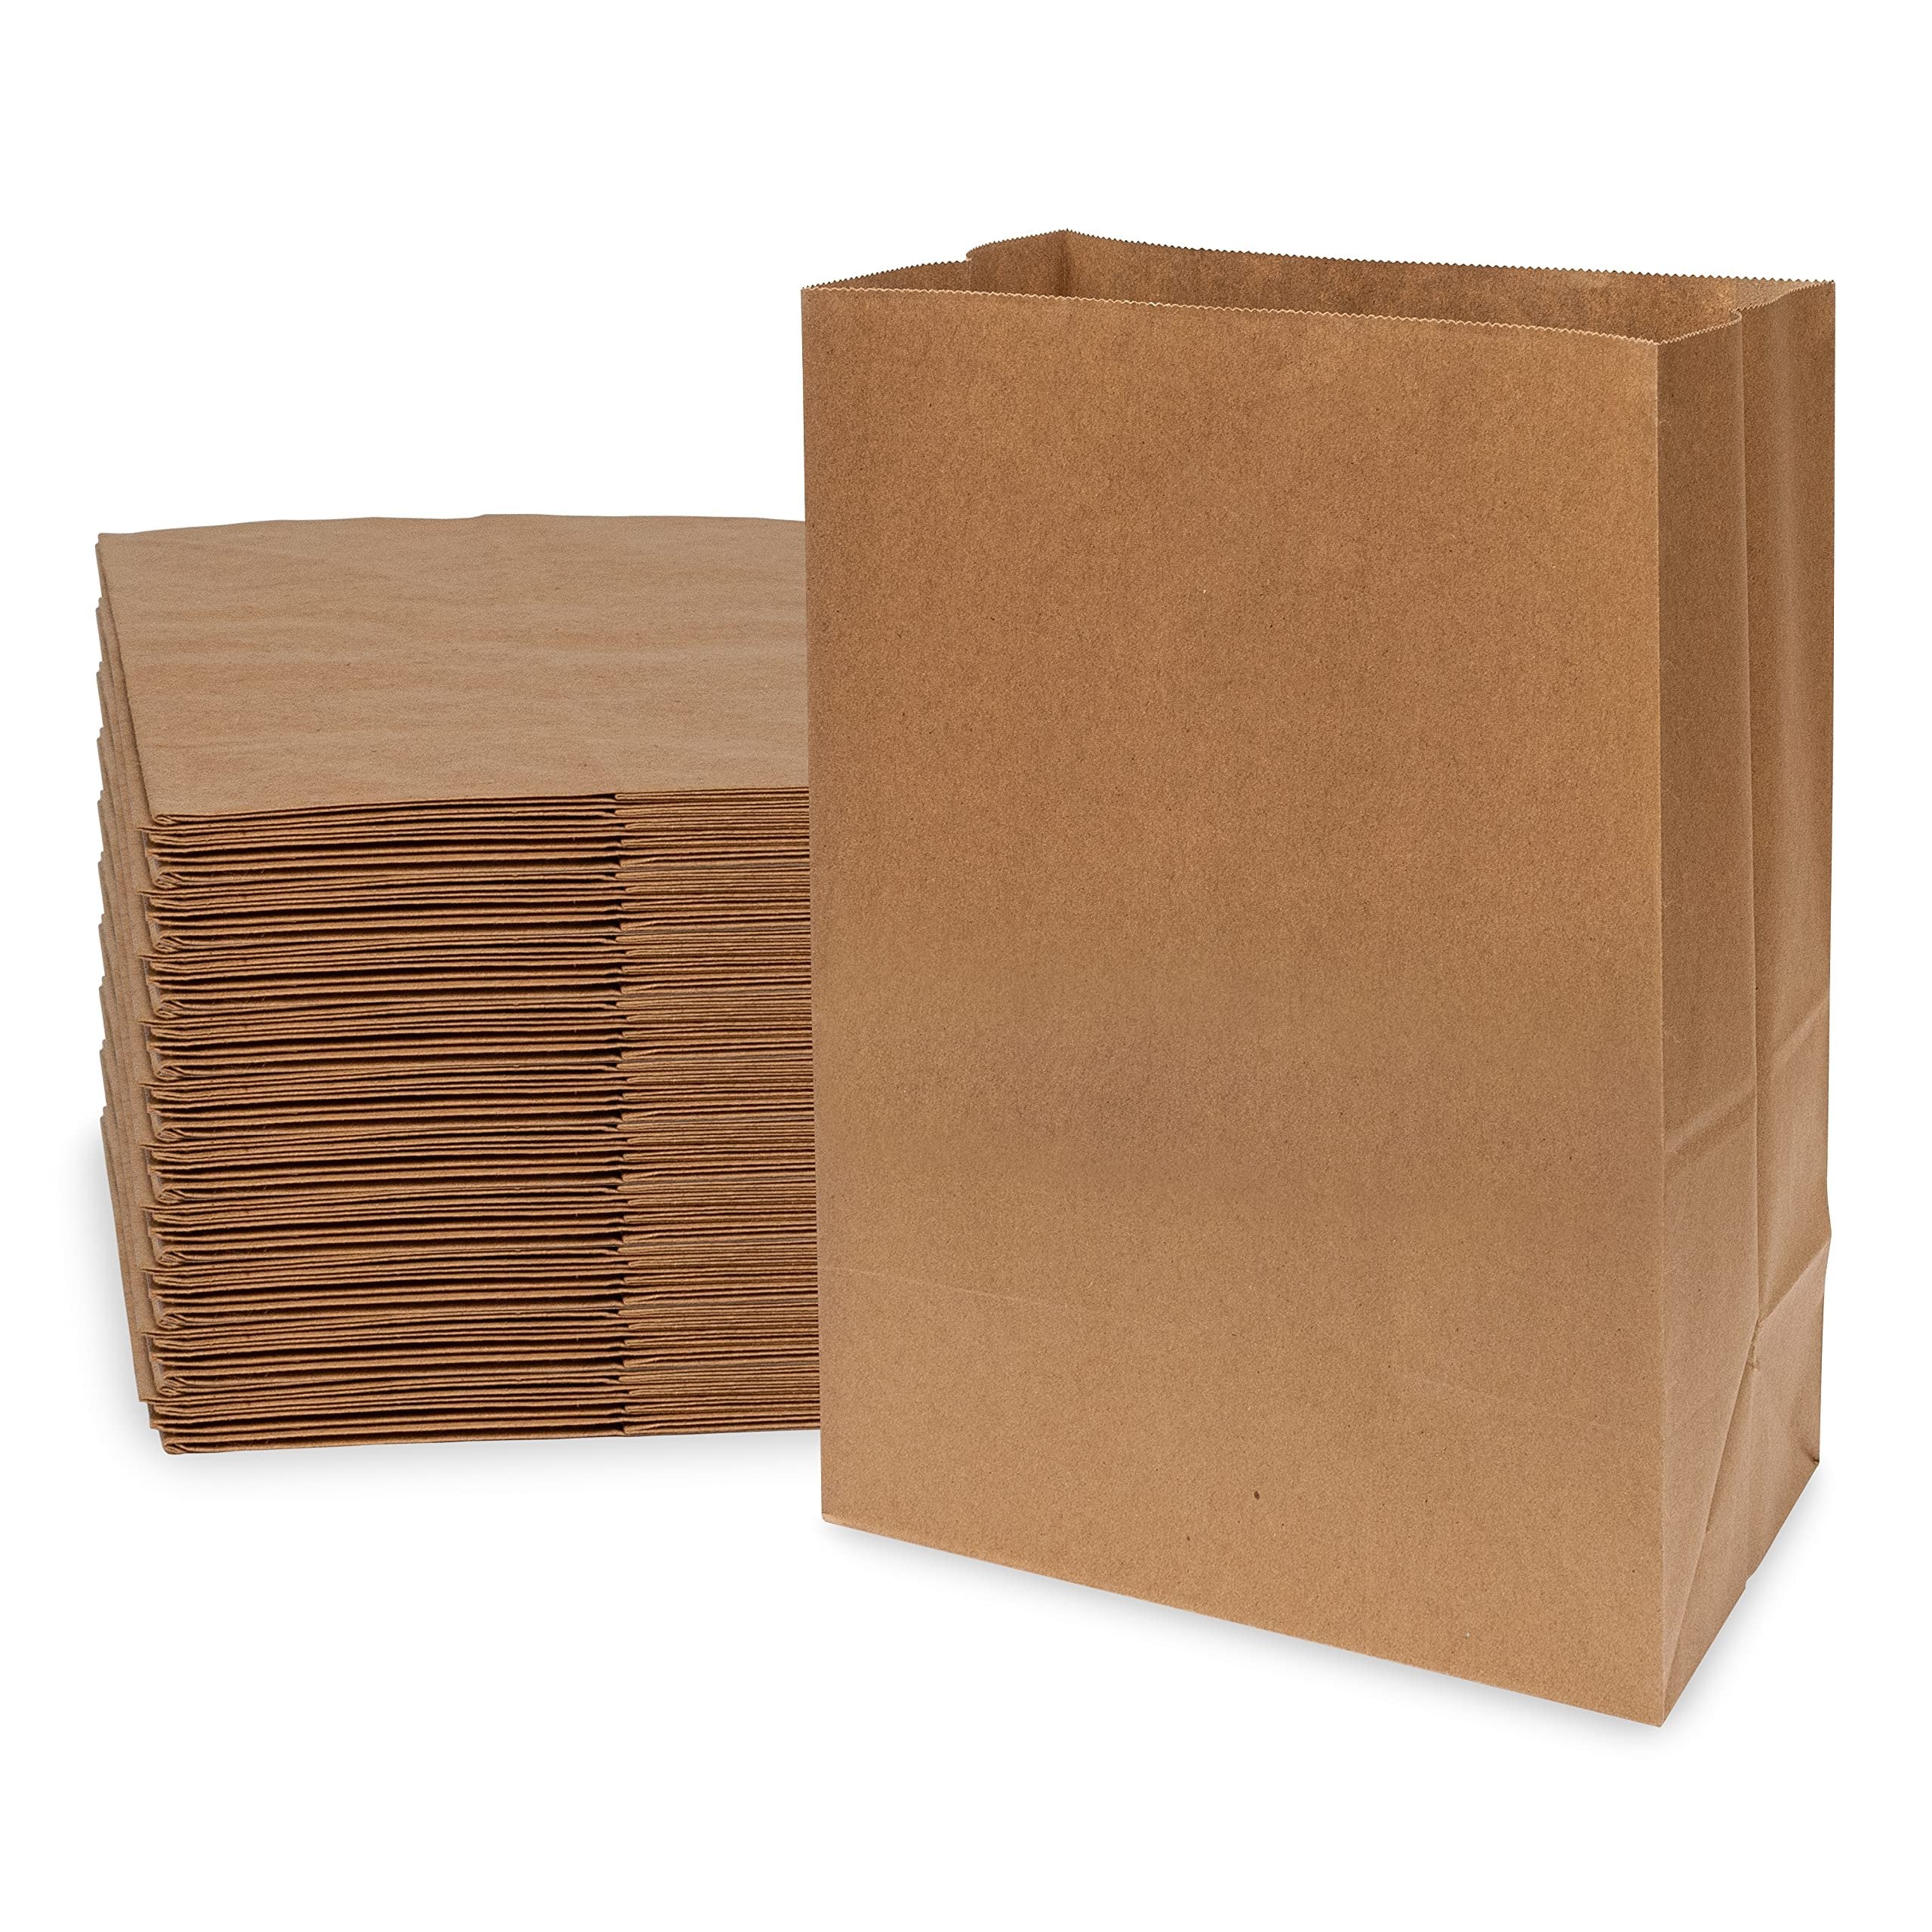 Brown Paper Bags - 1/8 BBL 100 Pack Kraft Paper Shopping Bags, SOS Grocery Bags Bulk for Lunch Bags, Food, Bread Bags, Delivery & Take Out, Deli, Bakery, Grocery and Convenience Store Use - 10x6x14